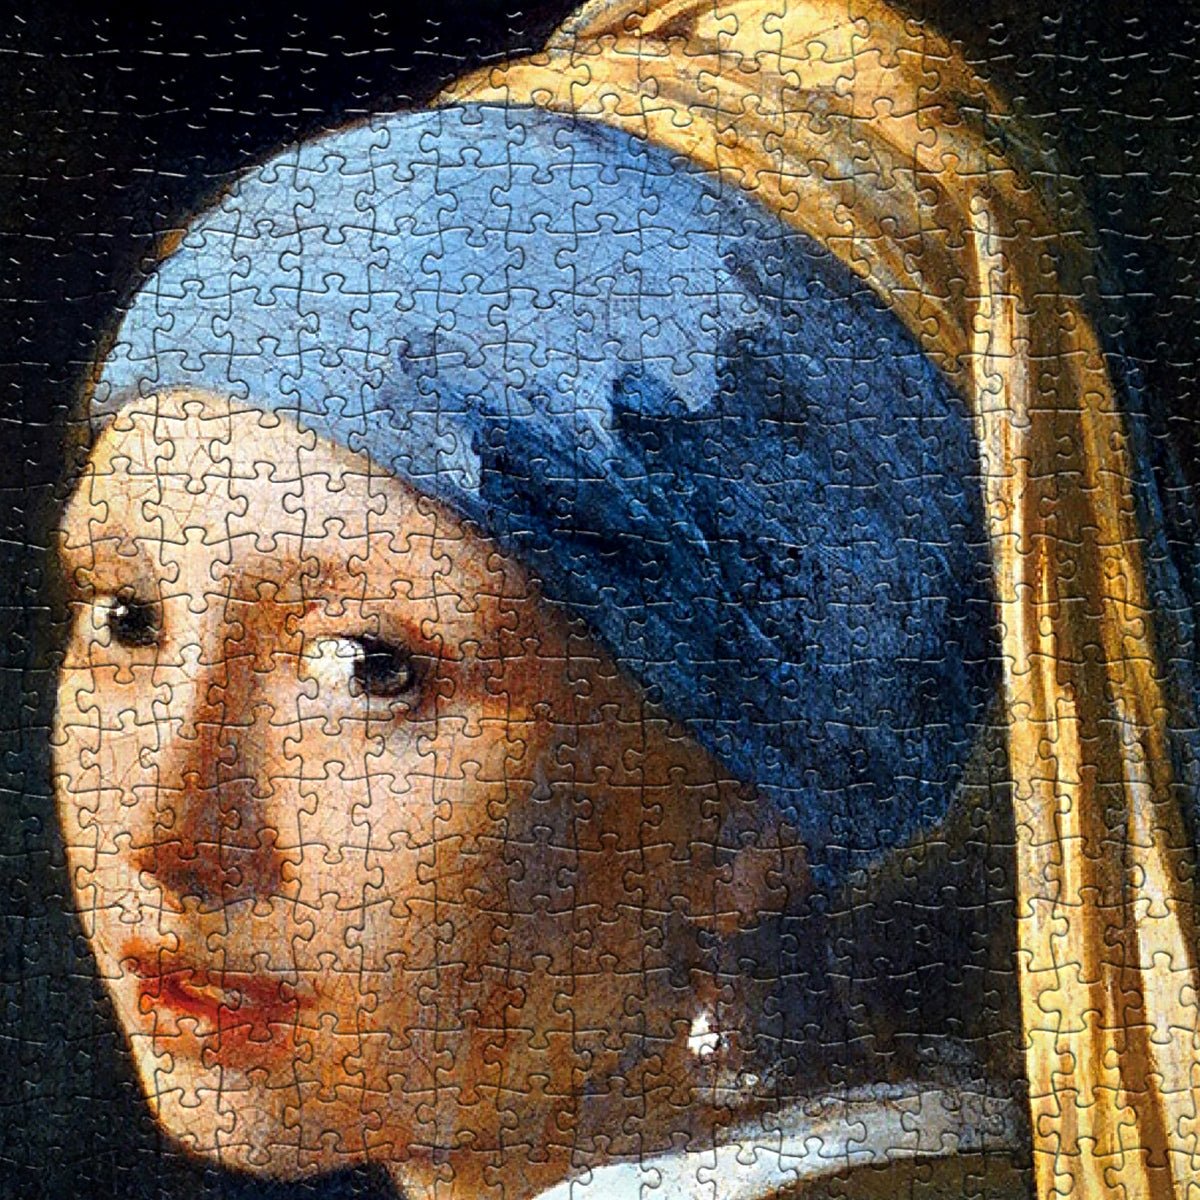 1000-piece Johannes Vermeer Girl With A Pearl Earring Jigsaw Puzzle ...